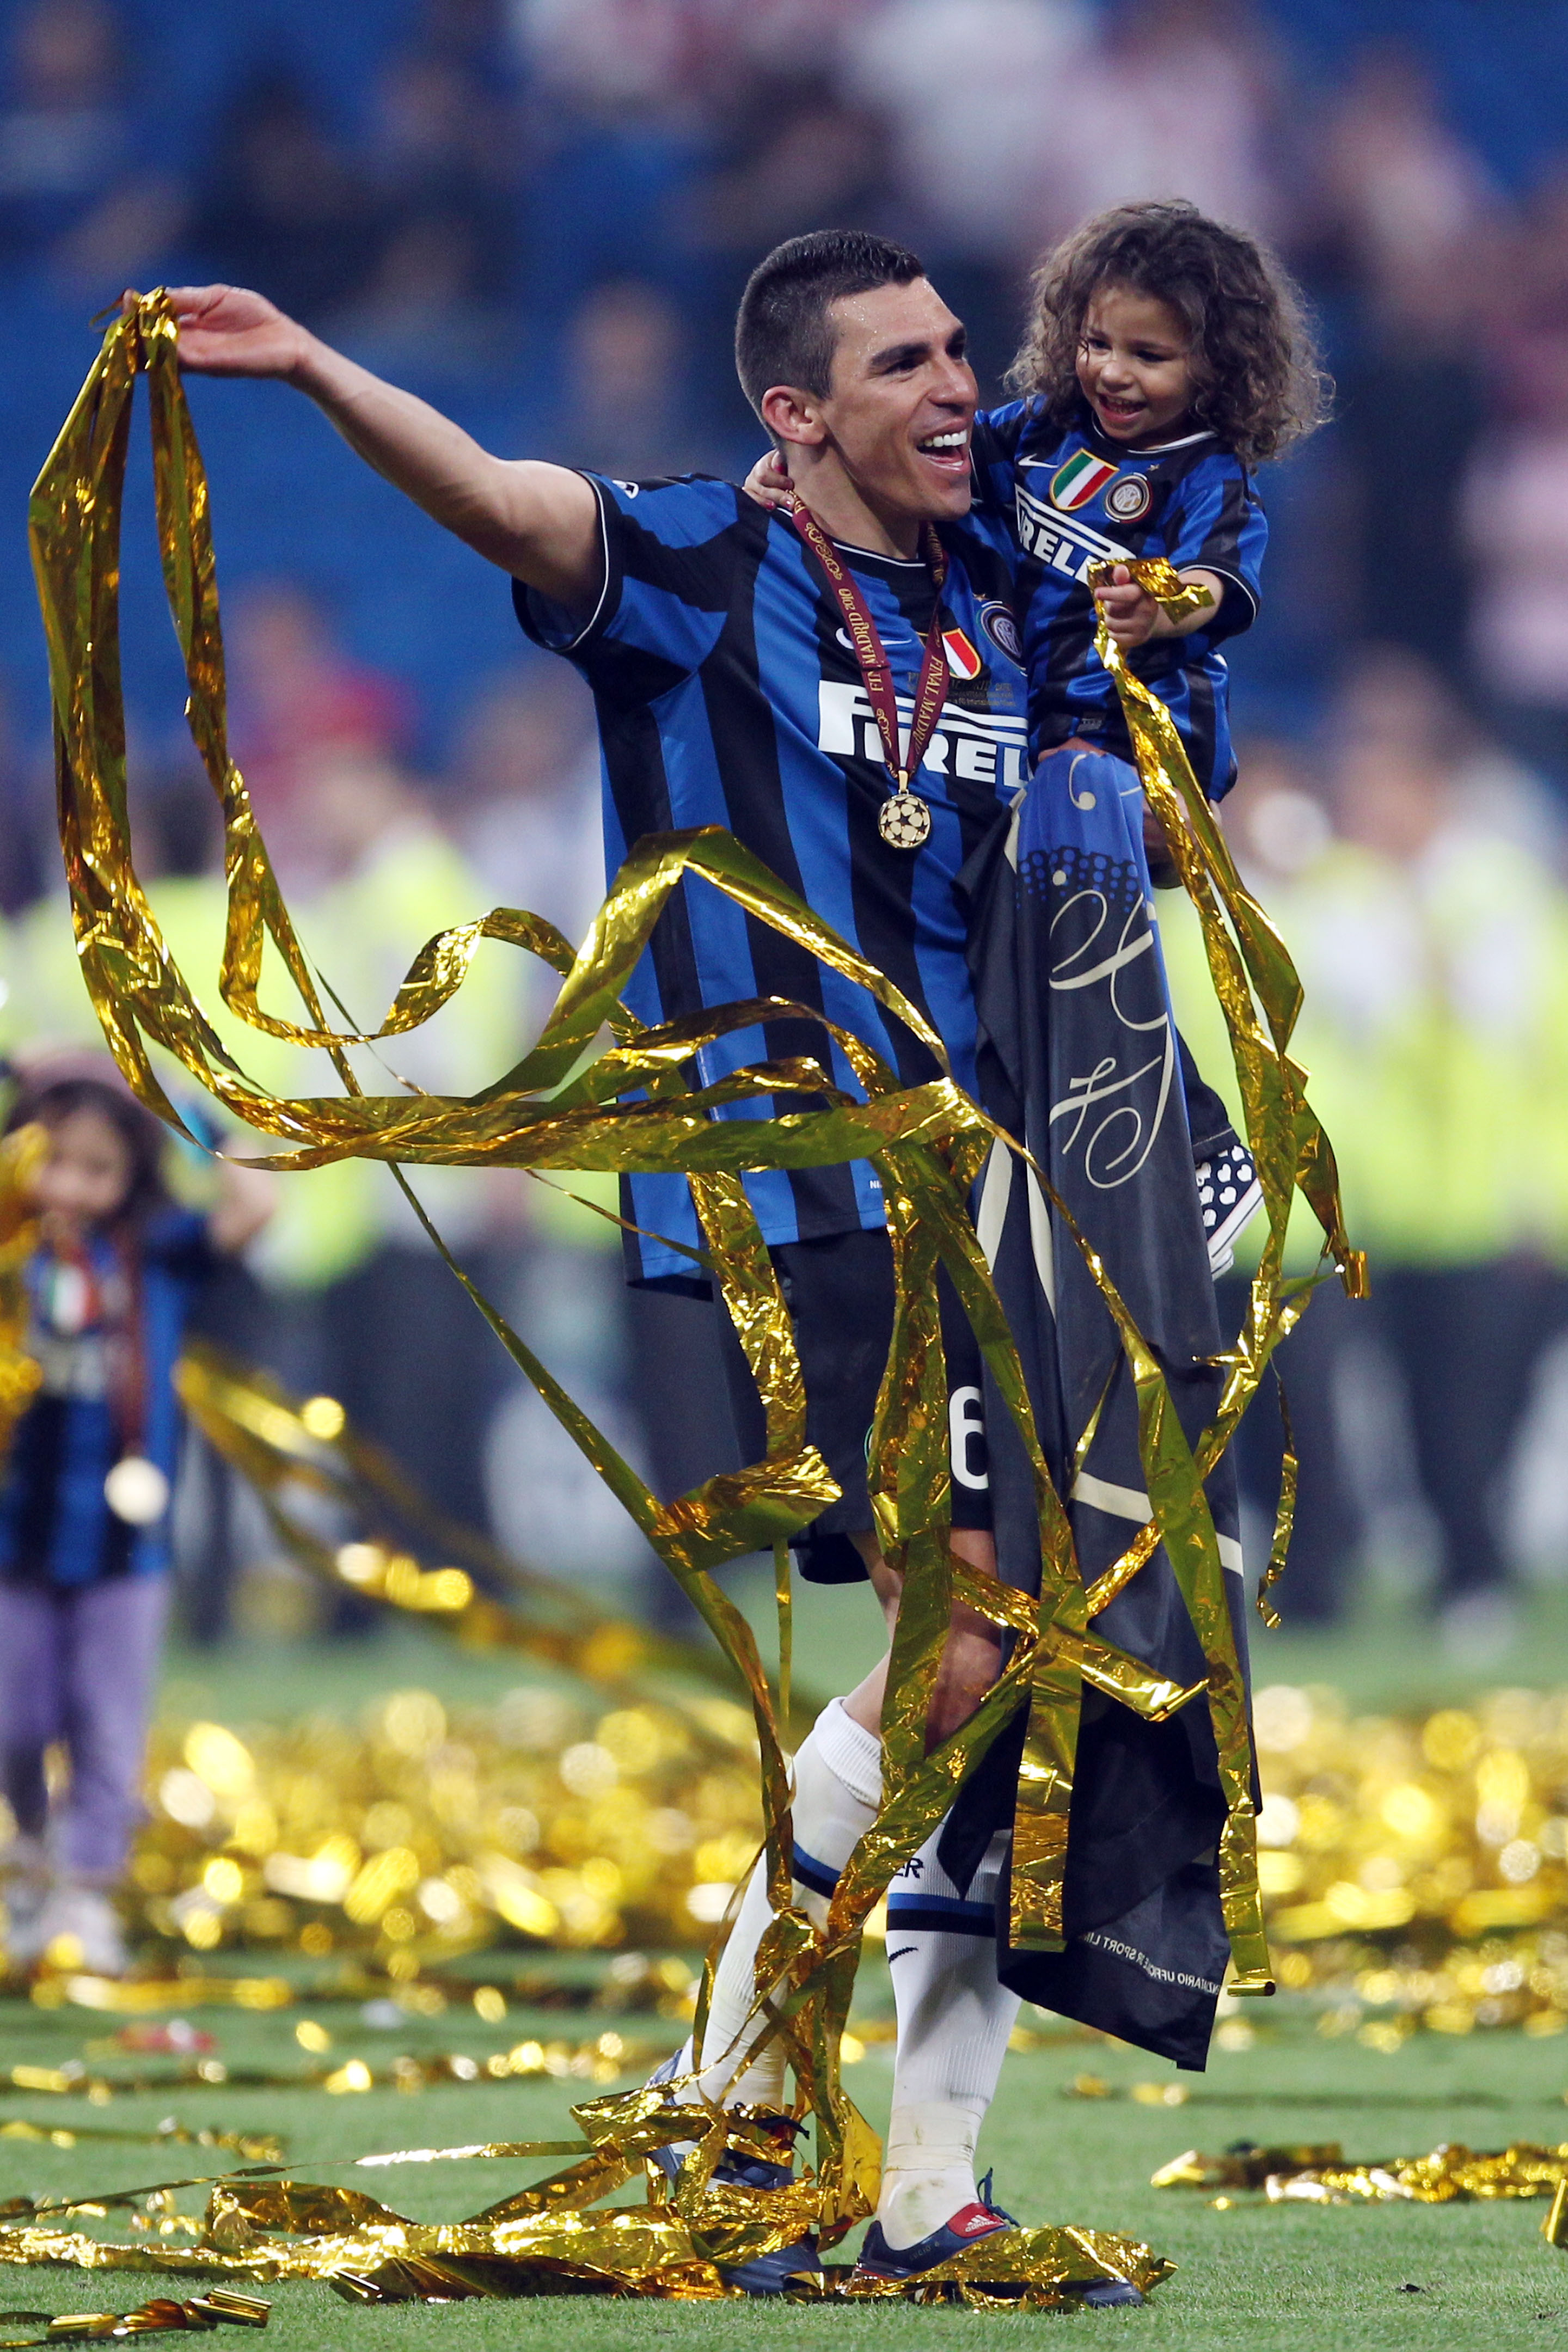 MADRID, SPAIN - MAY 22:  Lucio of Inter Milan and his family celebrate their team's victory at the end of the UEFA Champions League Final match between FC Bayern Muenchen and Inter Milan at the Estadio Santiago Bernabeu on May 22, 2010 in Madrid, Spain.